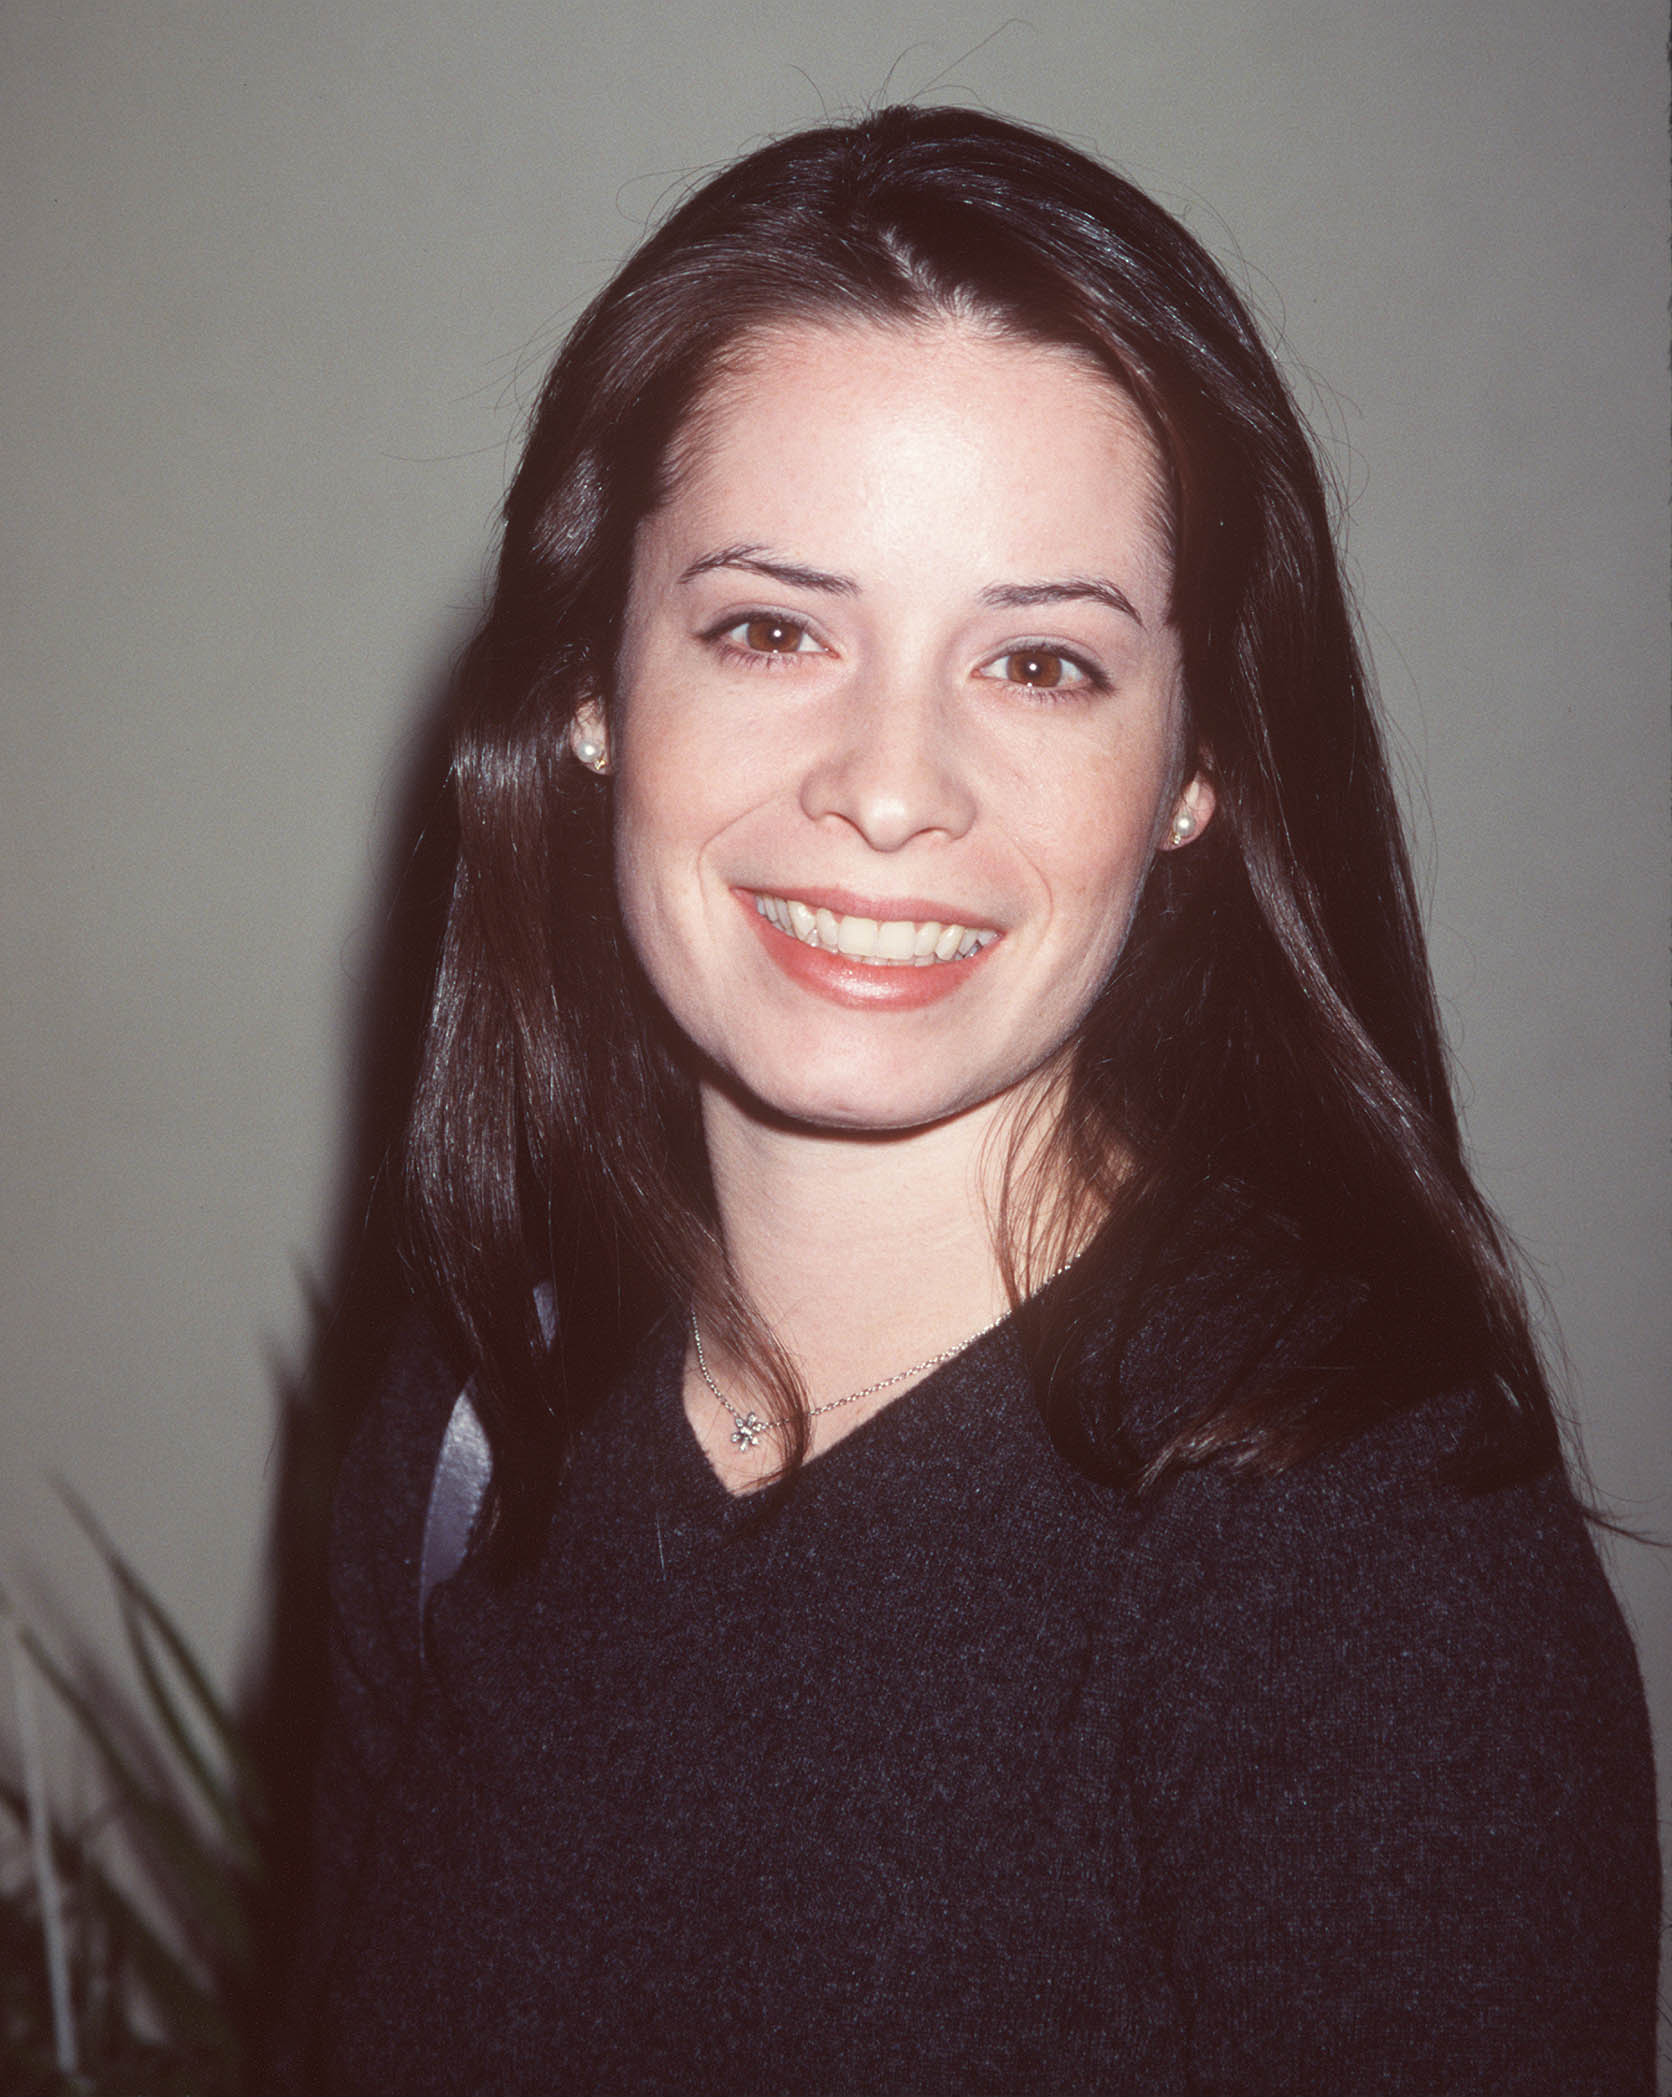 Holly Marie Combs during The WB's All Star Party for the Winter TCA Press Tour in Pasadena, California, on January 7, 1999. | Source: Getty Images